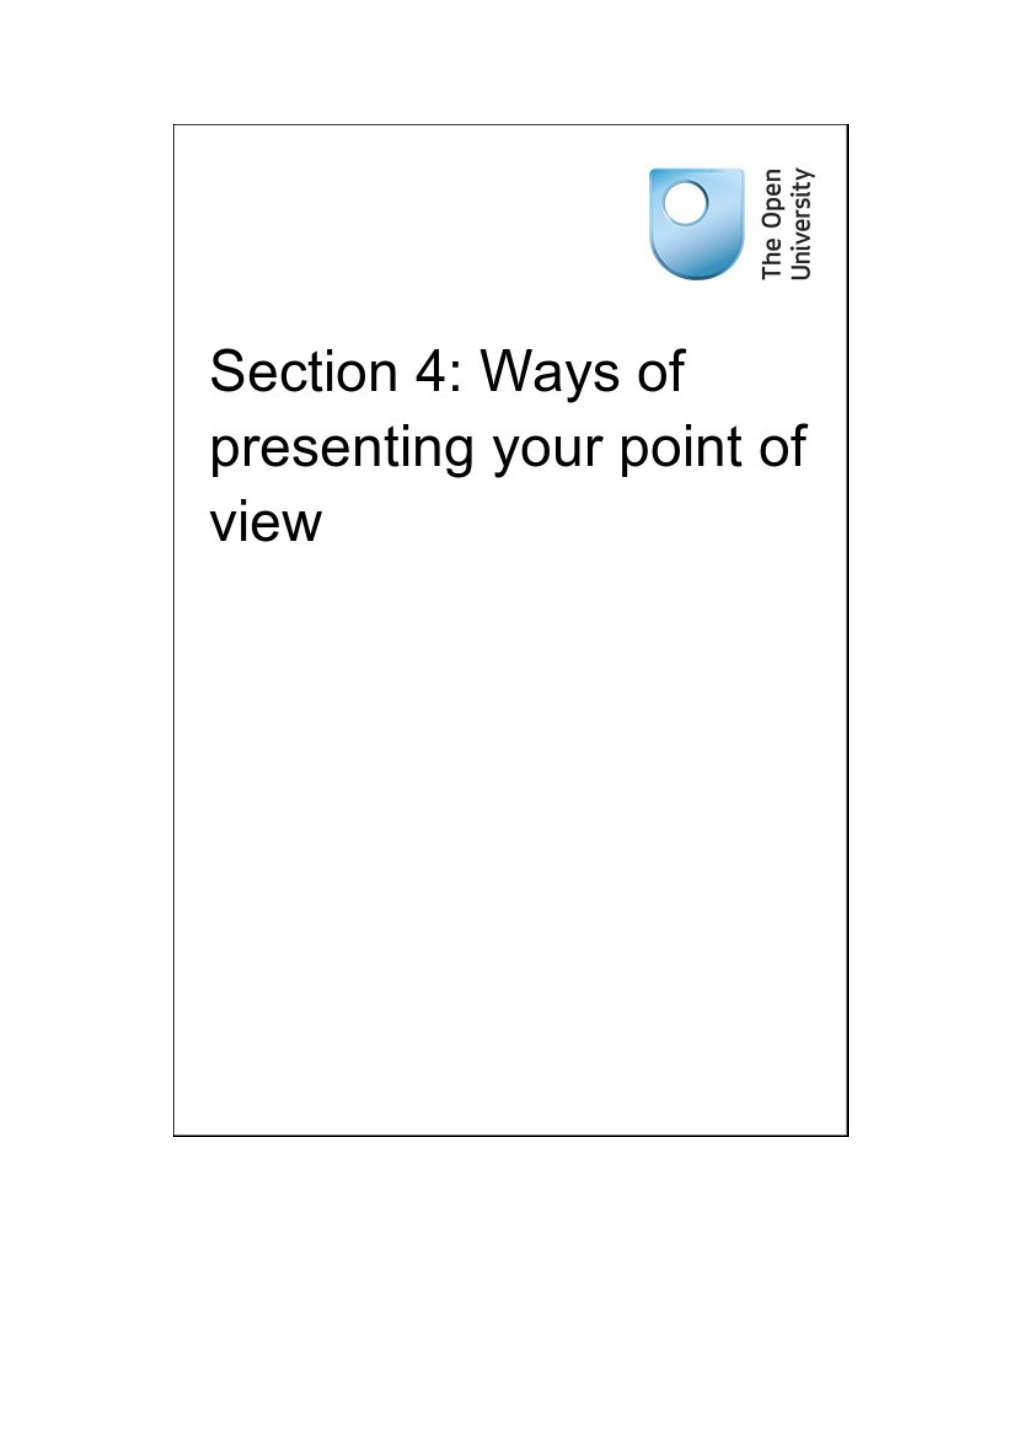 Section 4: Ways of Presenting Your Point of View